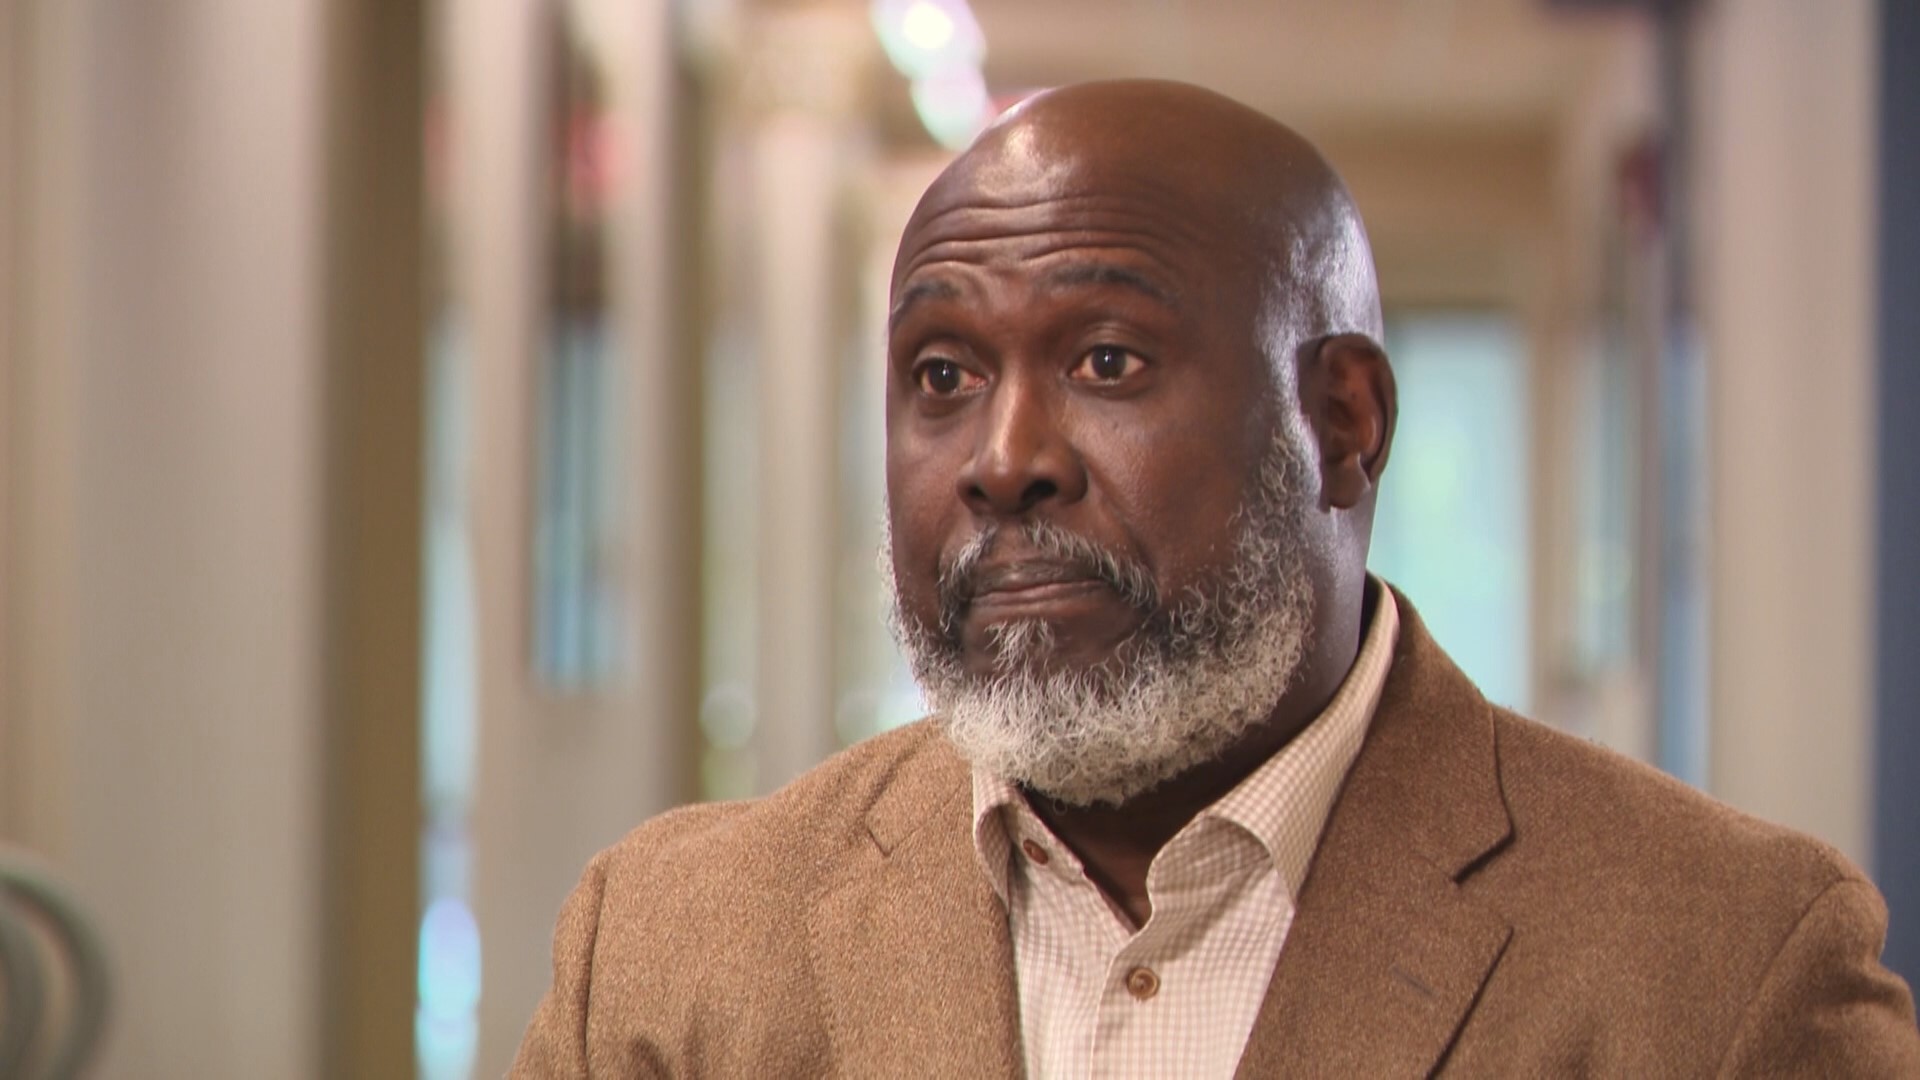 Pastor F. Bruce Williams is the voice for his congregation in Smoketown. After surviving a major health scare, he's using that same voice to help save lives.